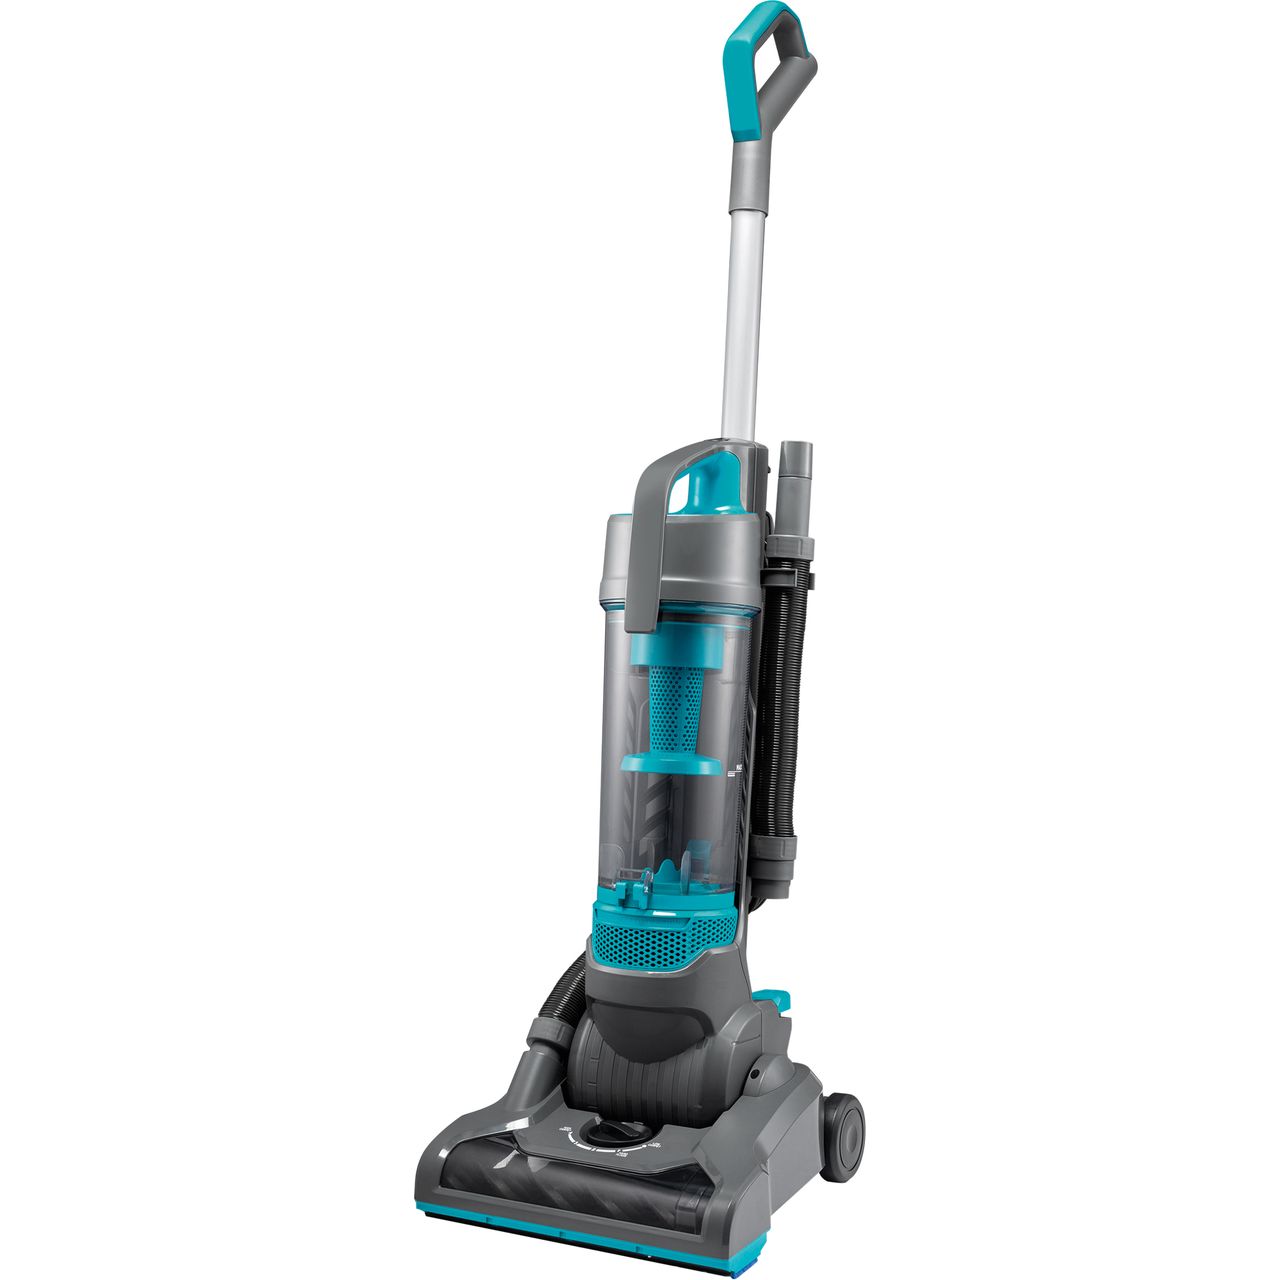 Beko VCS5125AB Upright Vacuum Cleaner Review